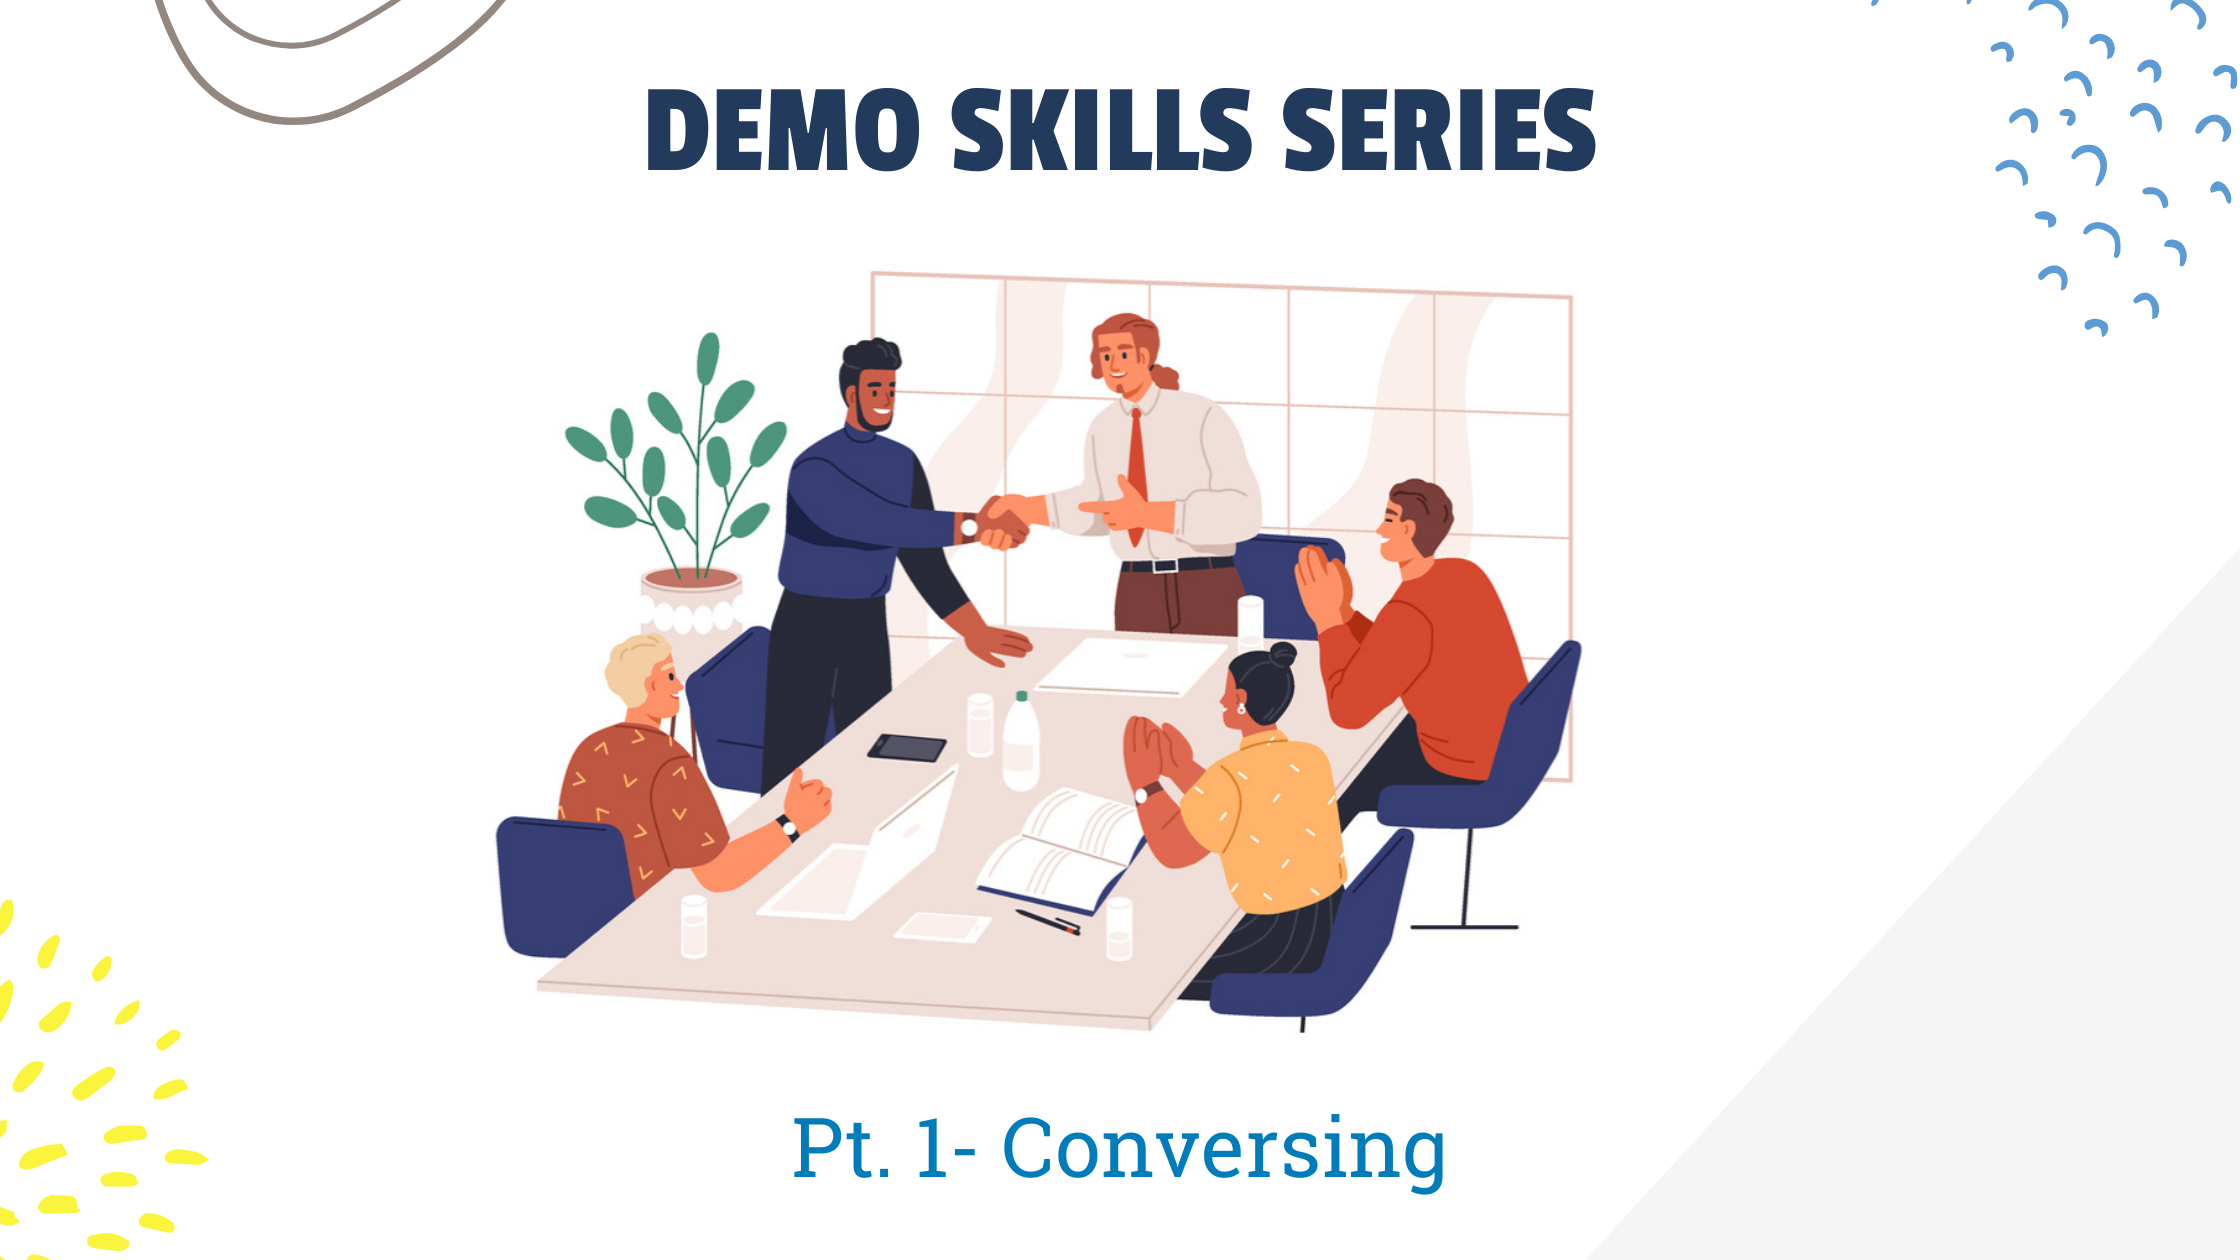 Demo Skills Series- Conversing With Every Audience Member